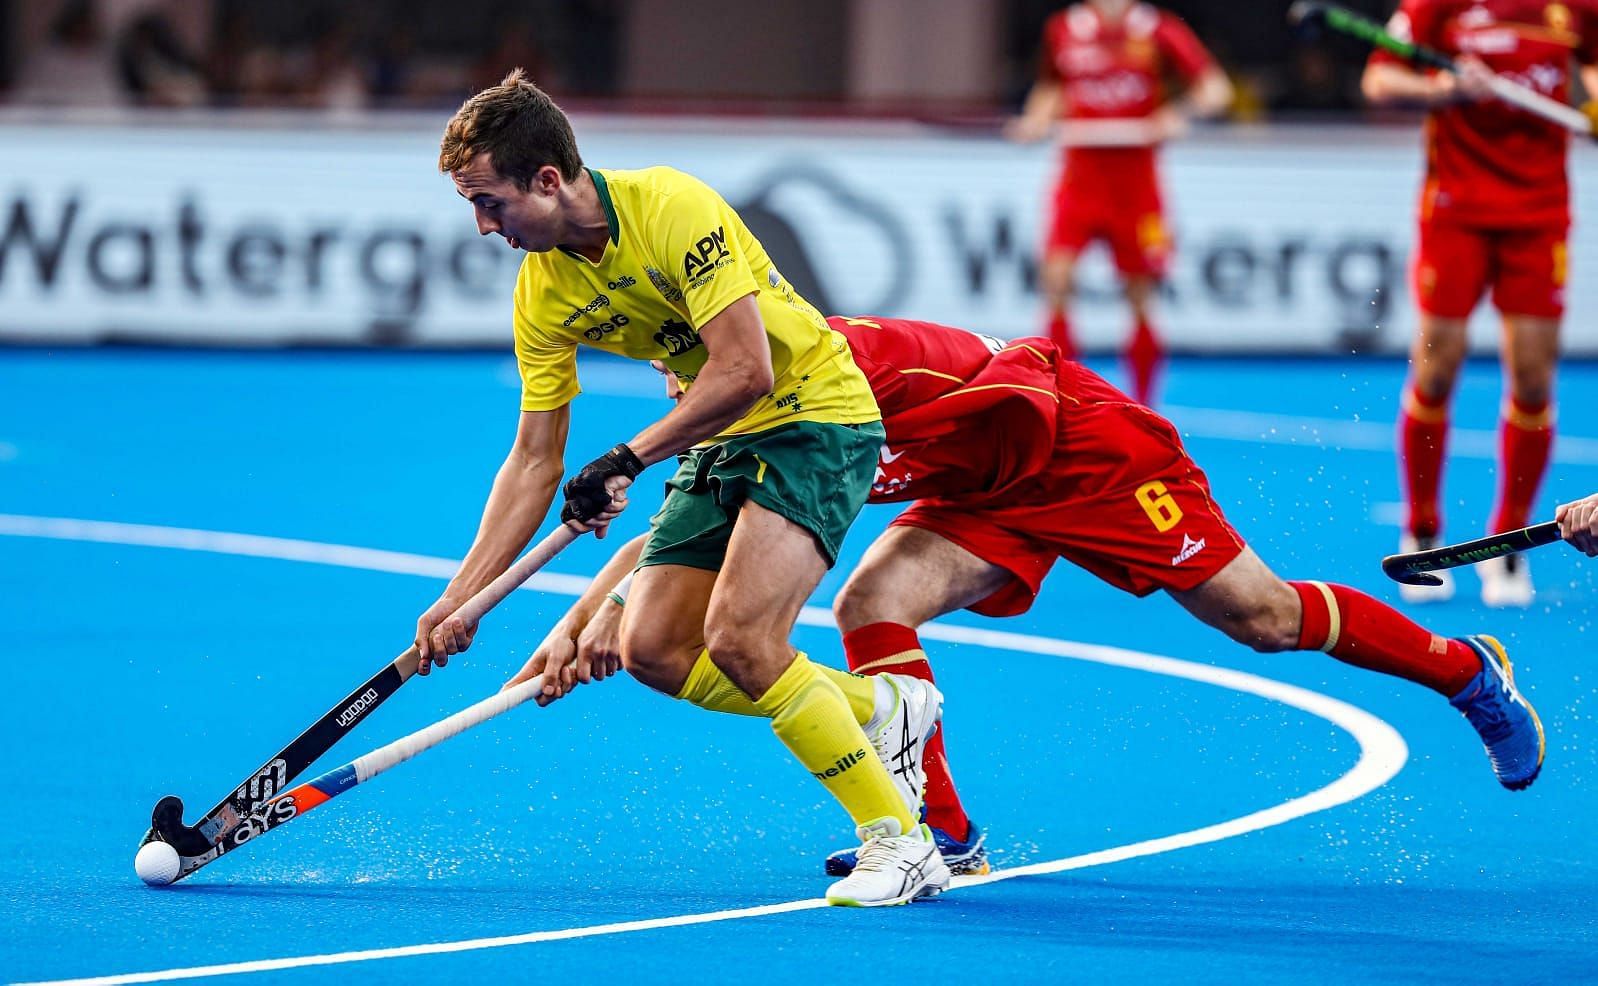 Australia remain in the hunt for a World Cup medal Image Ctsy: Hockey India